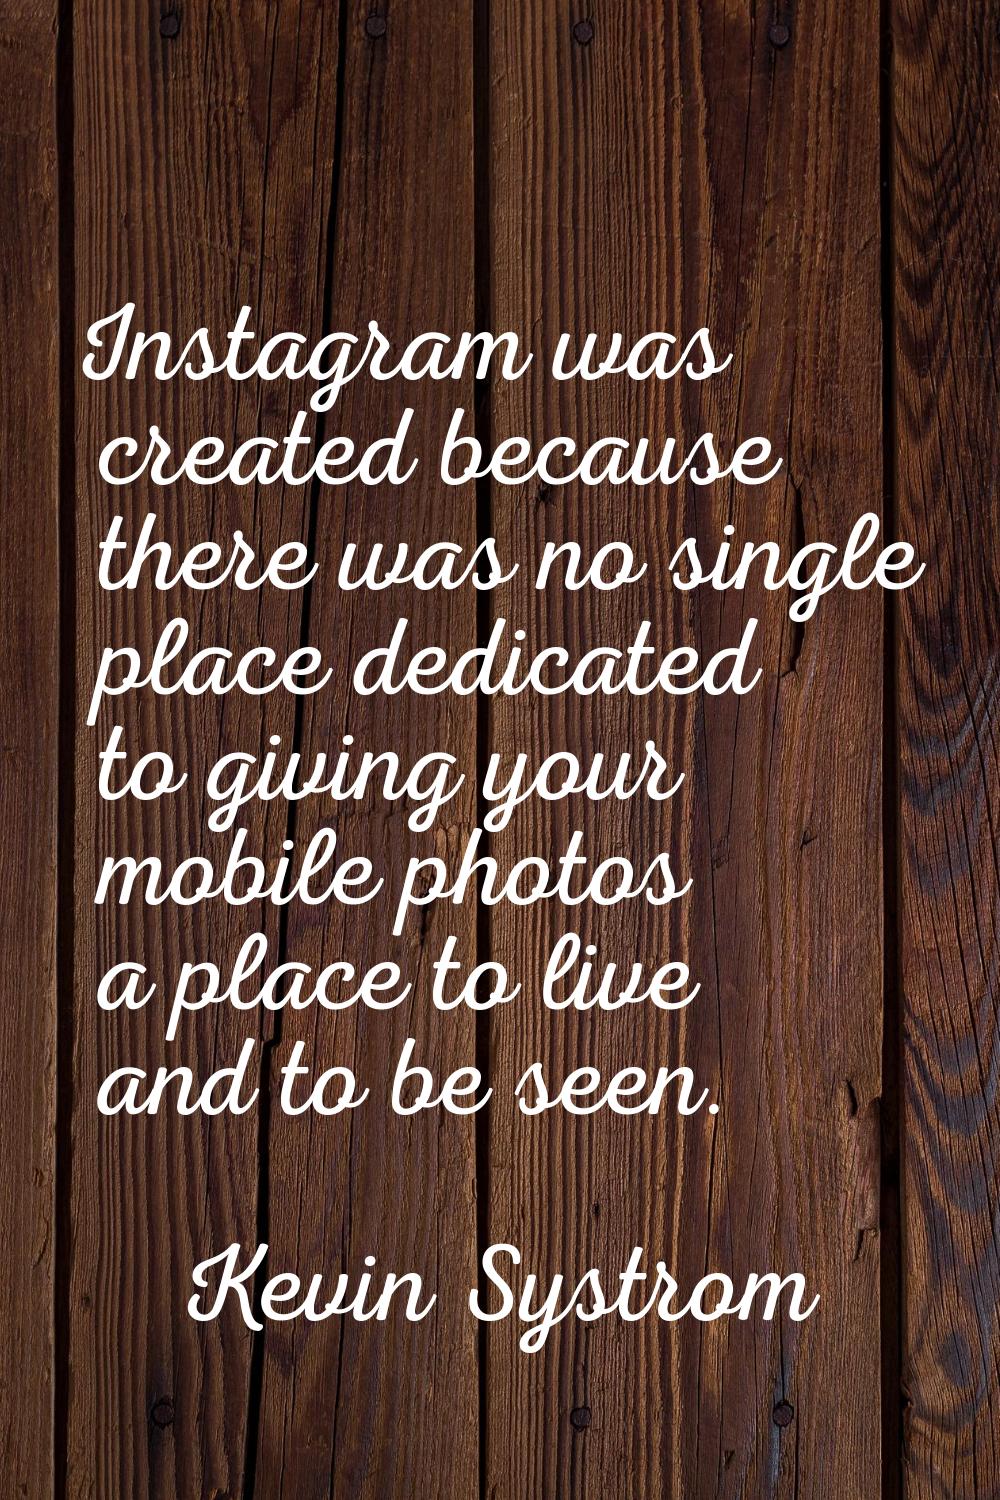 Instagram was created because there was no single place dedicated to giving your mobile photos a pl